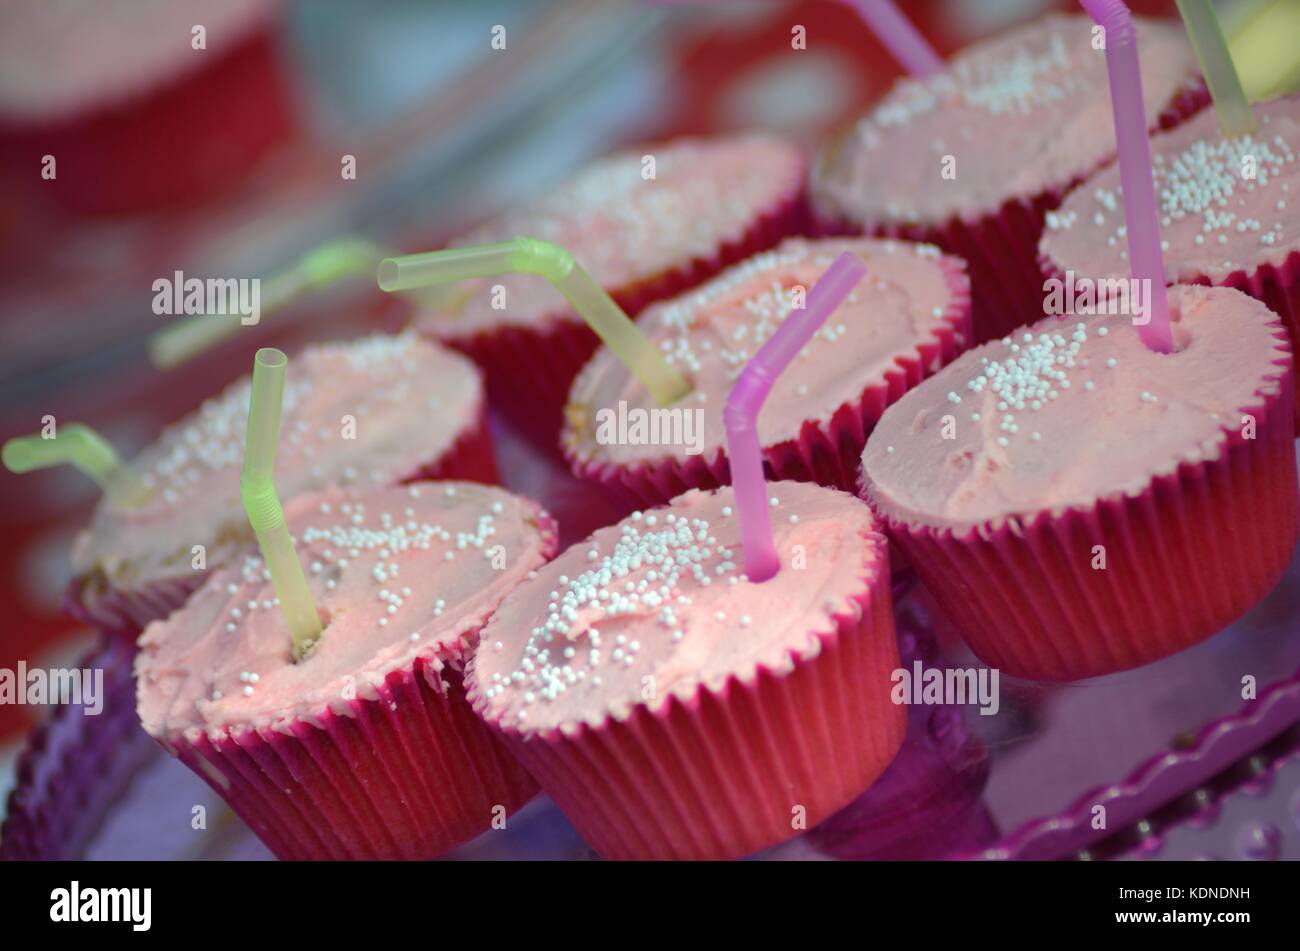 Pink cupcakes on sale at school fete Stock Photo